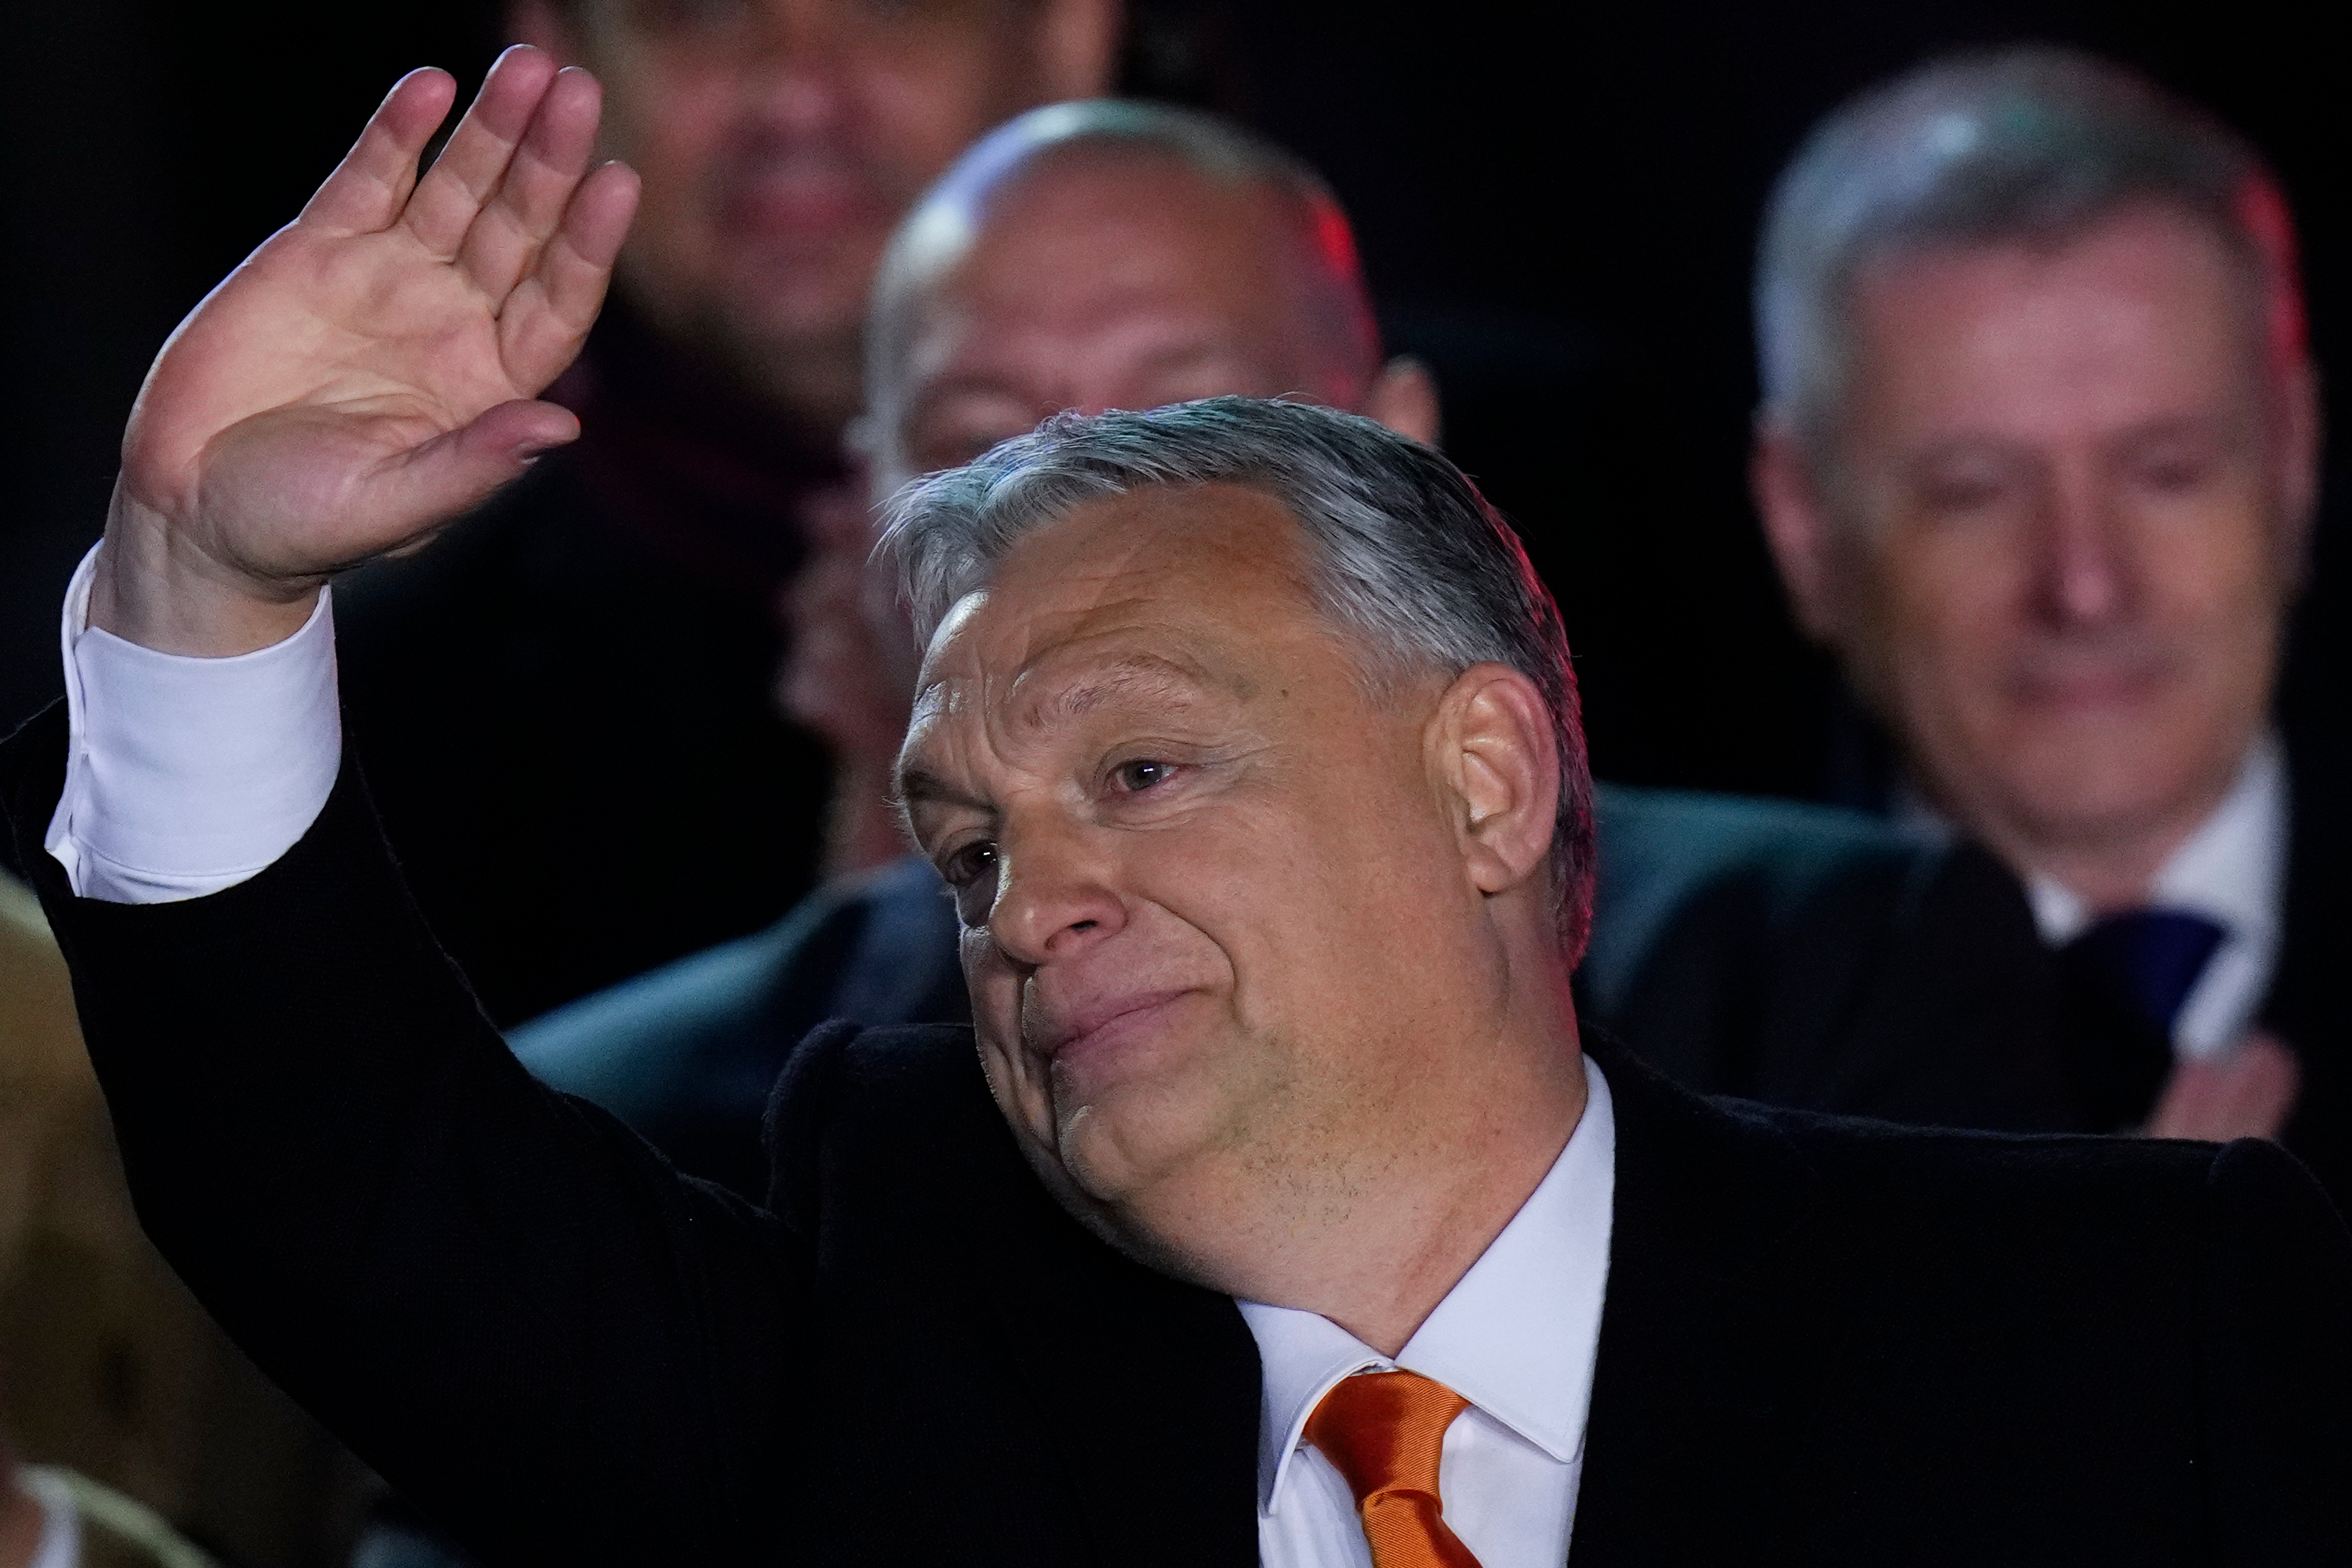 Hungary’s Prime Minister Viktor Orban greets cheering supporters during an election night rally in Budapest on Sunday (AP Photo/Petr David Josek)